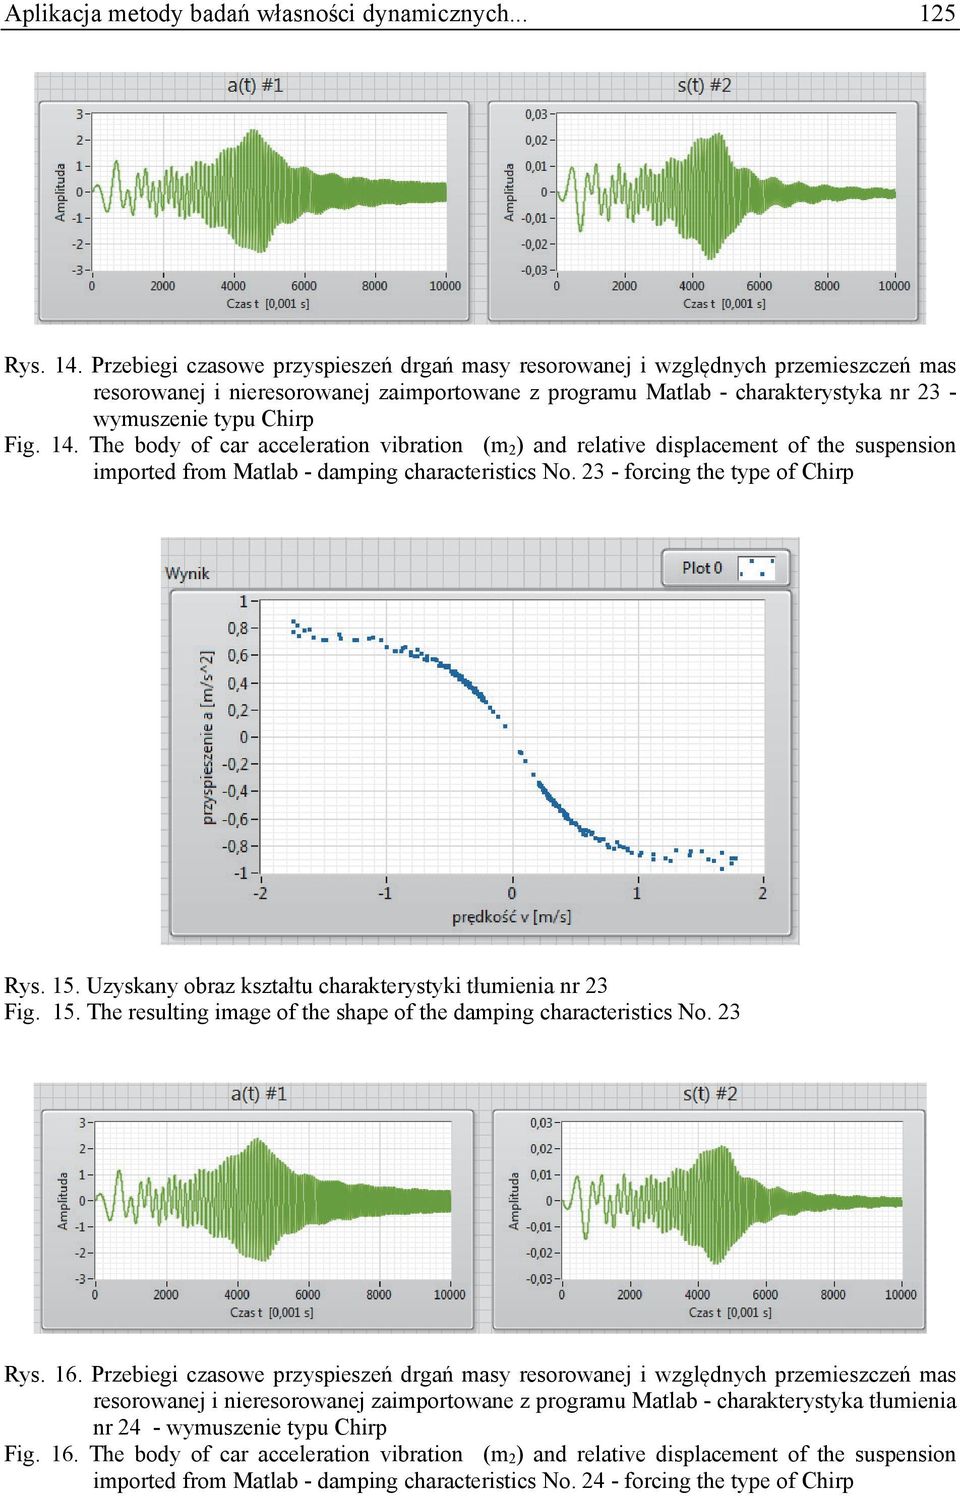 The body of car acceleraton vbraton (m ) and relatve dsplacement of the suspenson mported from Matlab - dampng characterstcs No. 3 - forcng the type of Chrp Rys. 15.